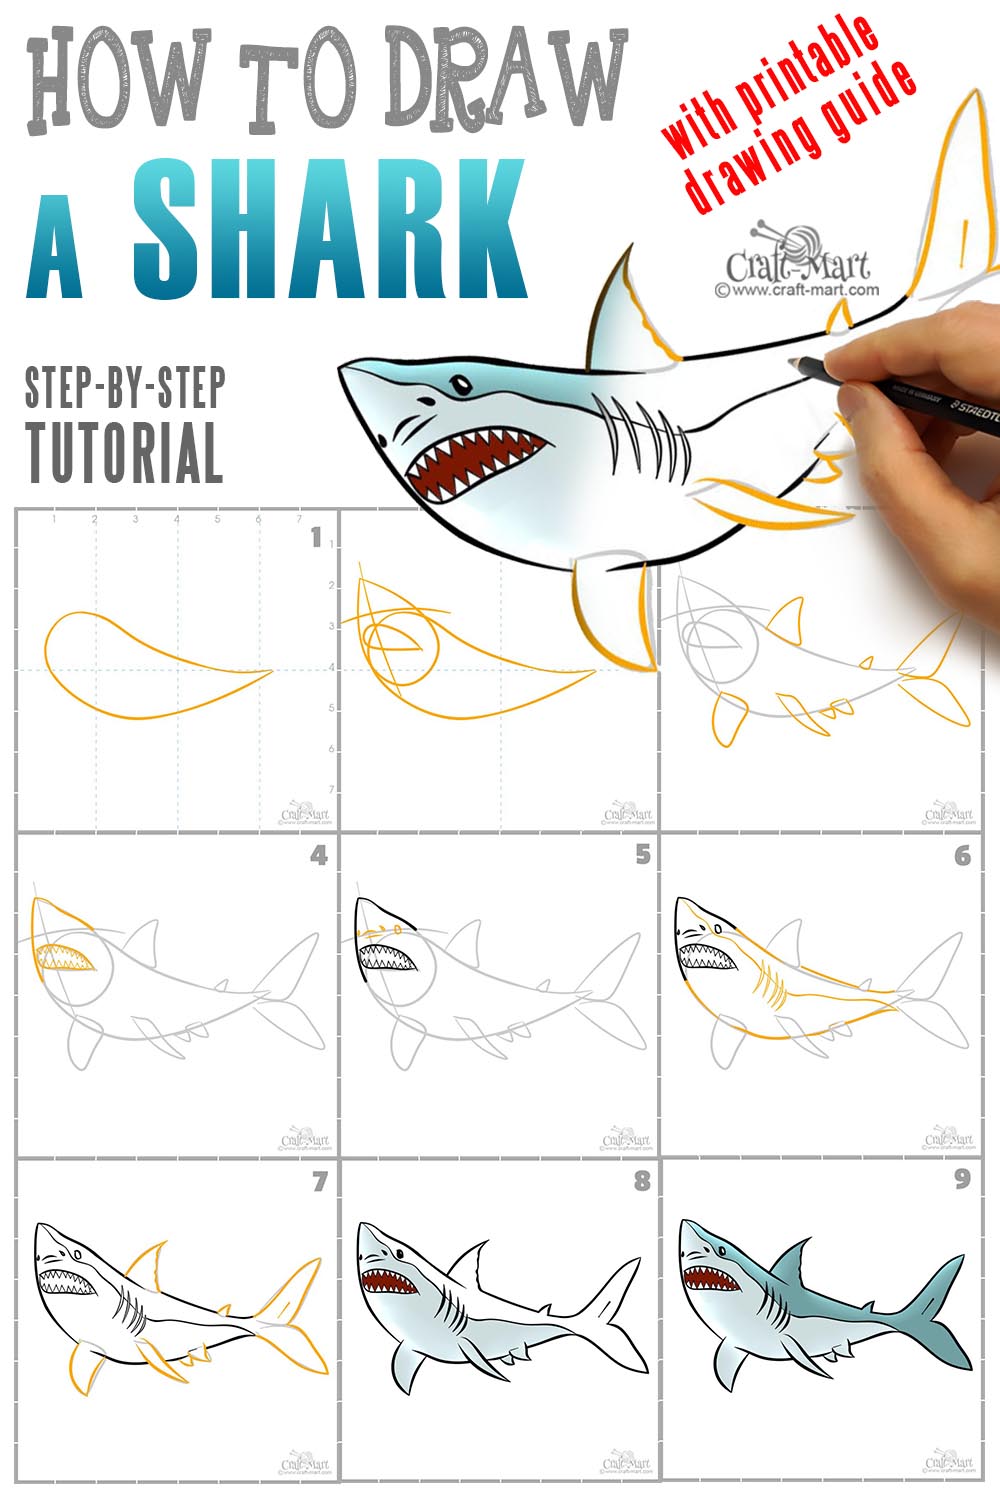 Learn how to draw a shark in 9 easy steps